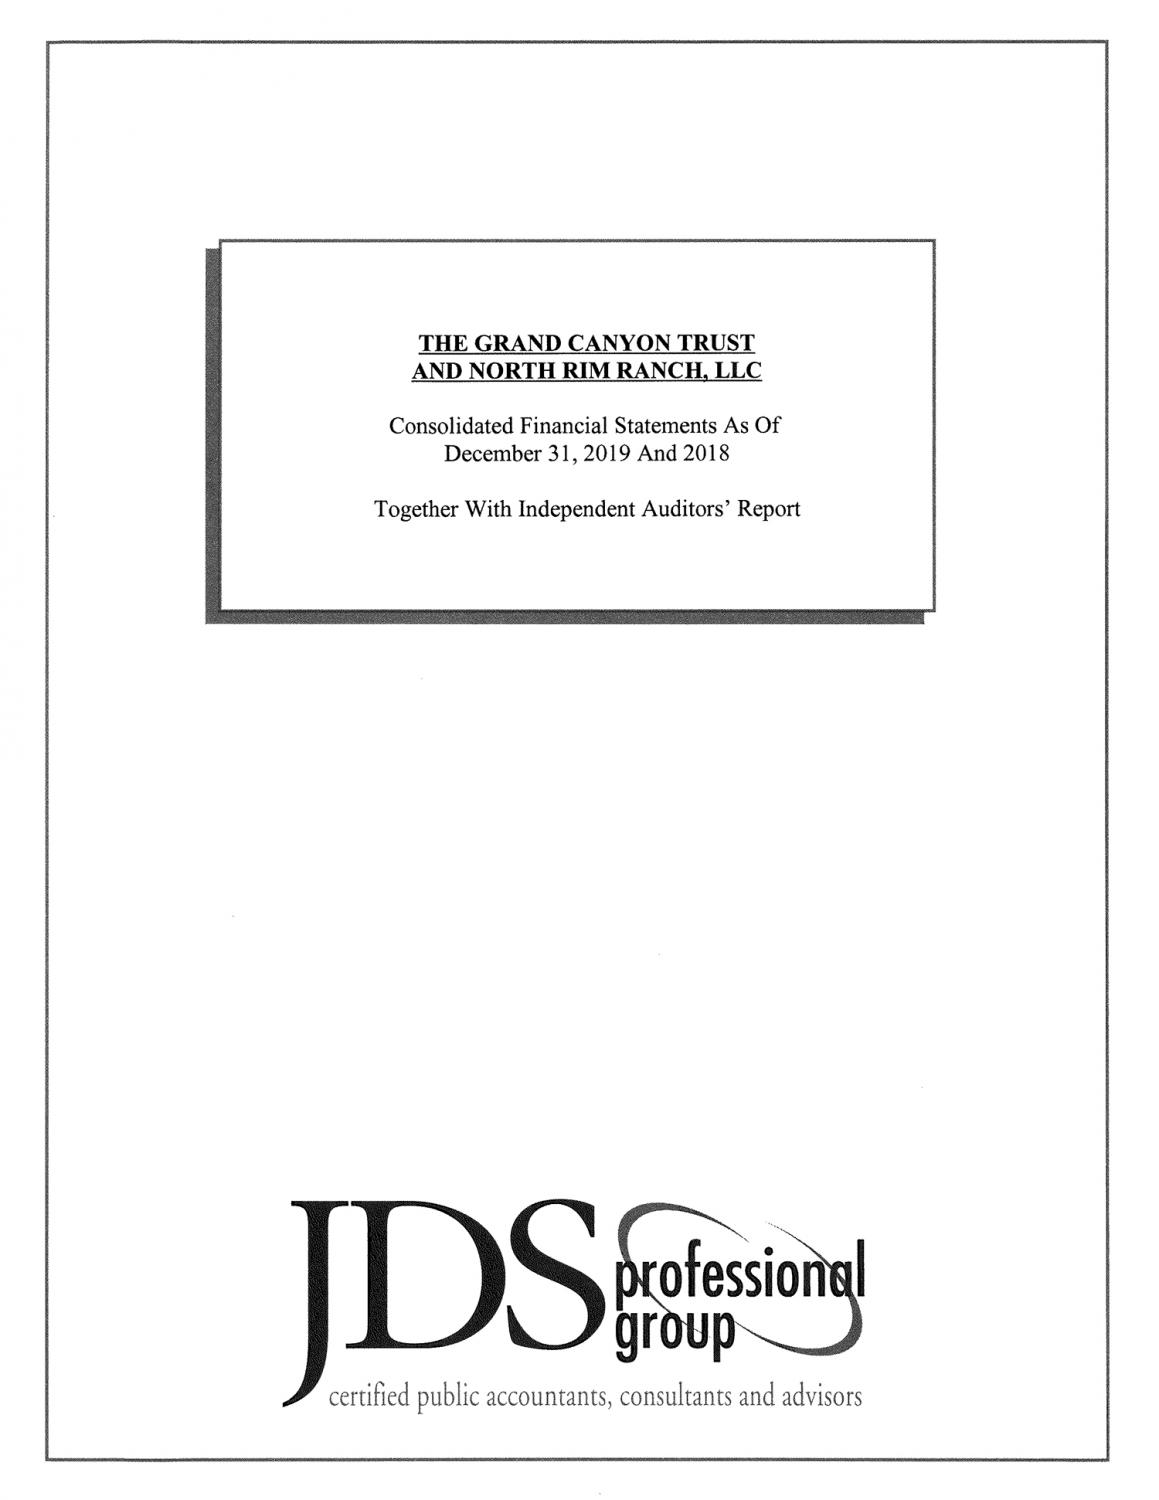 Cover page of statement